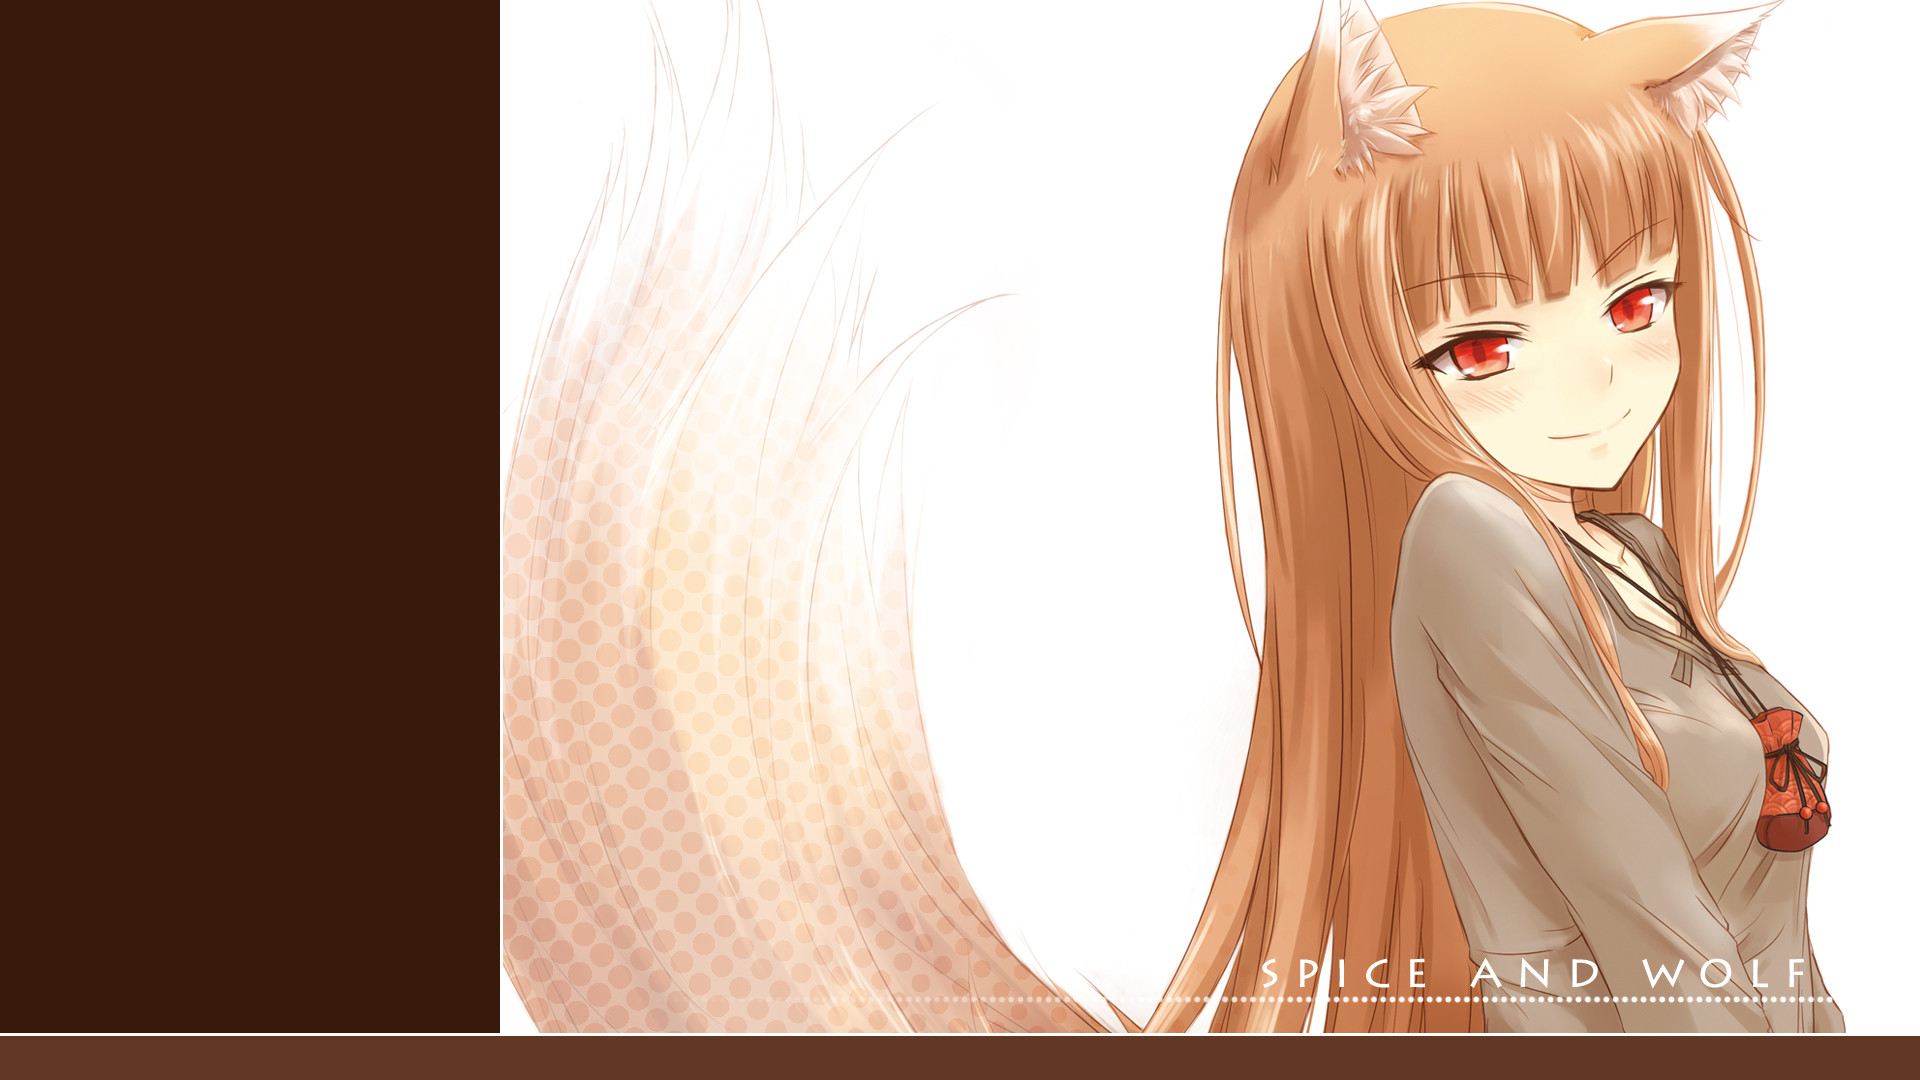 1920x1080 filter:Ookami to Koushinryou (Spice And Wolf), Wallpaper